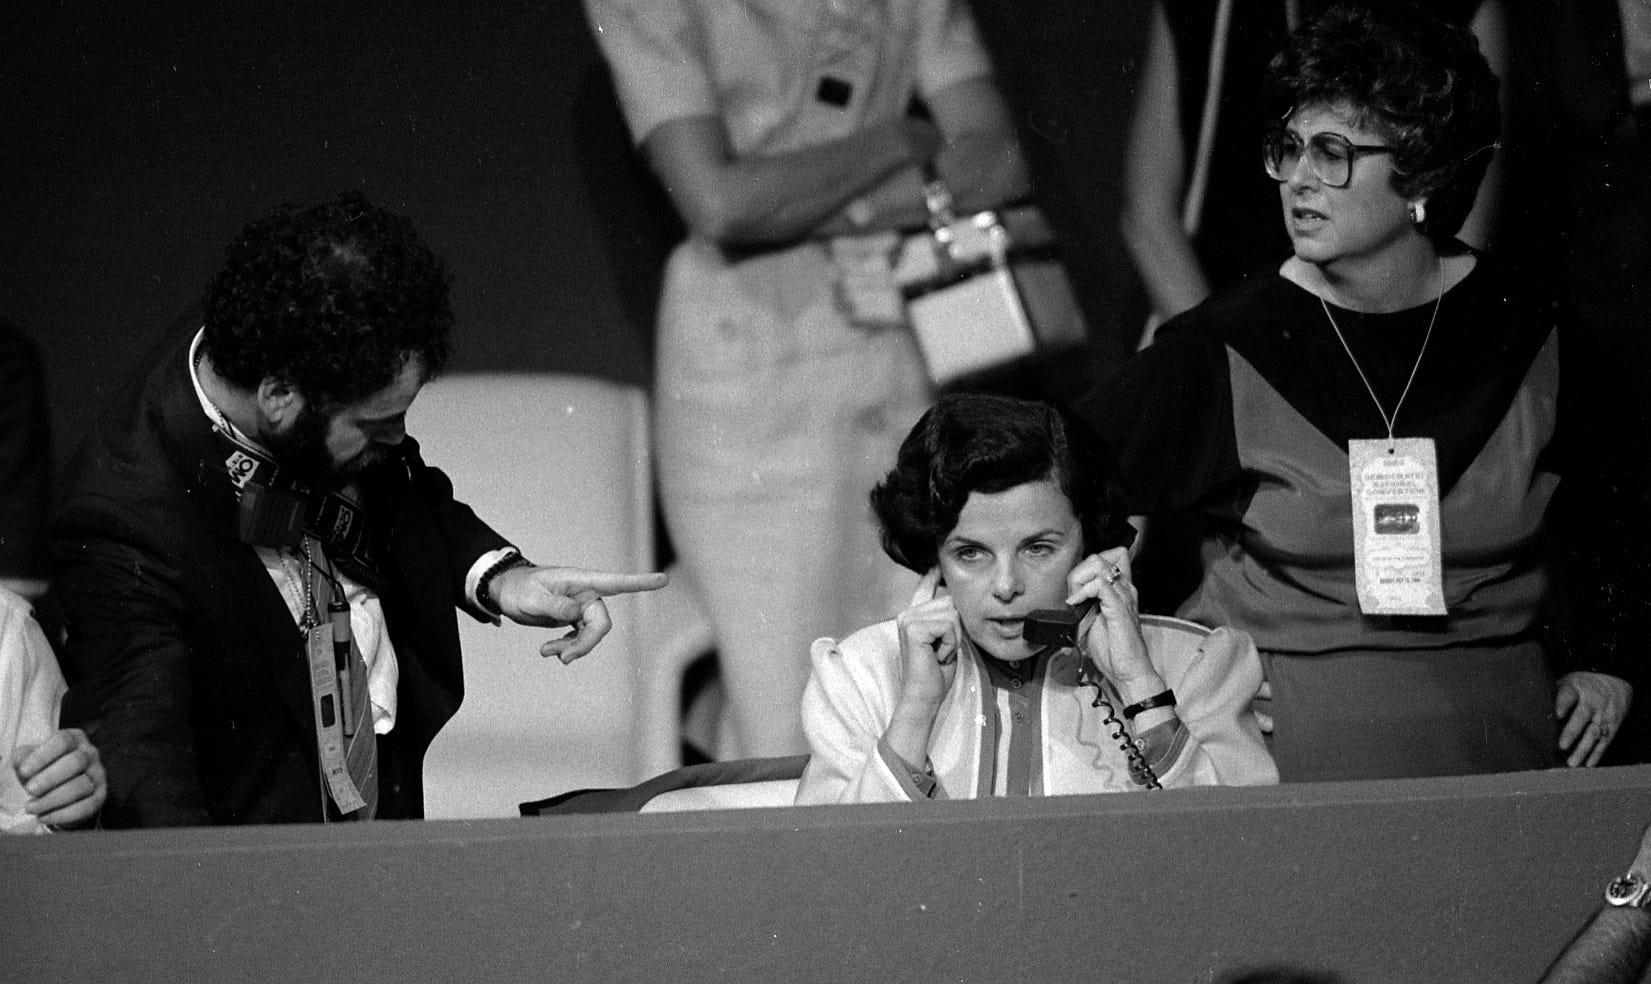 Mayor Dianne Feinstein at the 1984 Democratic National Convention held at Moscone Center in San Francisco